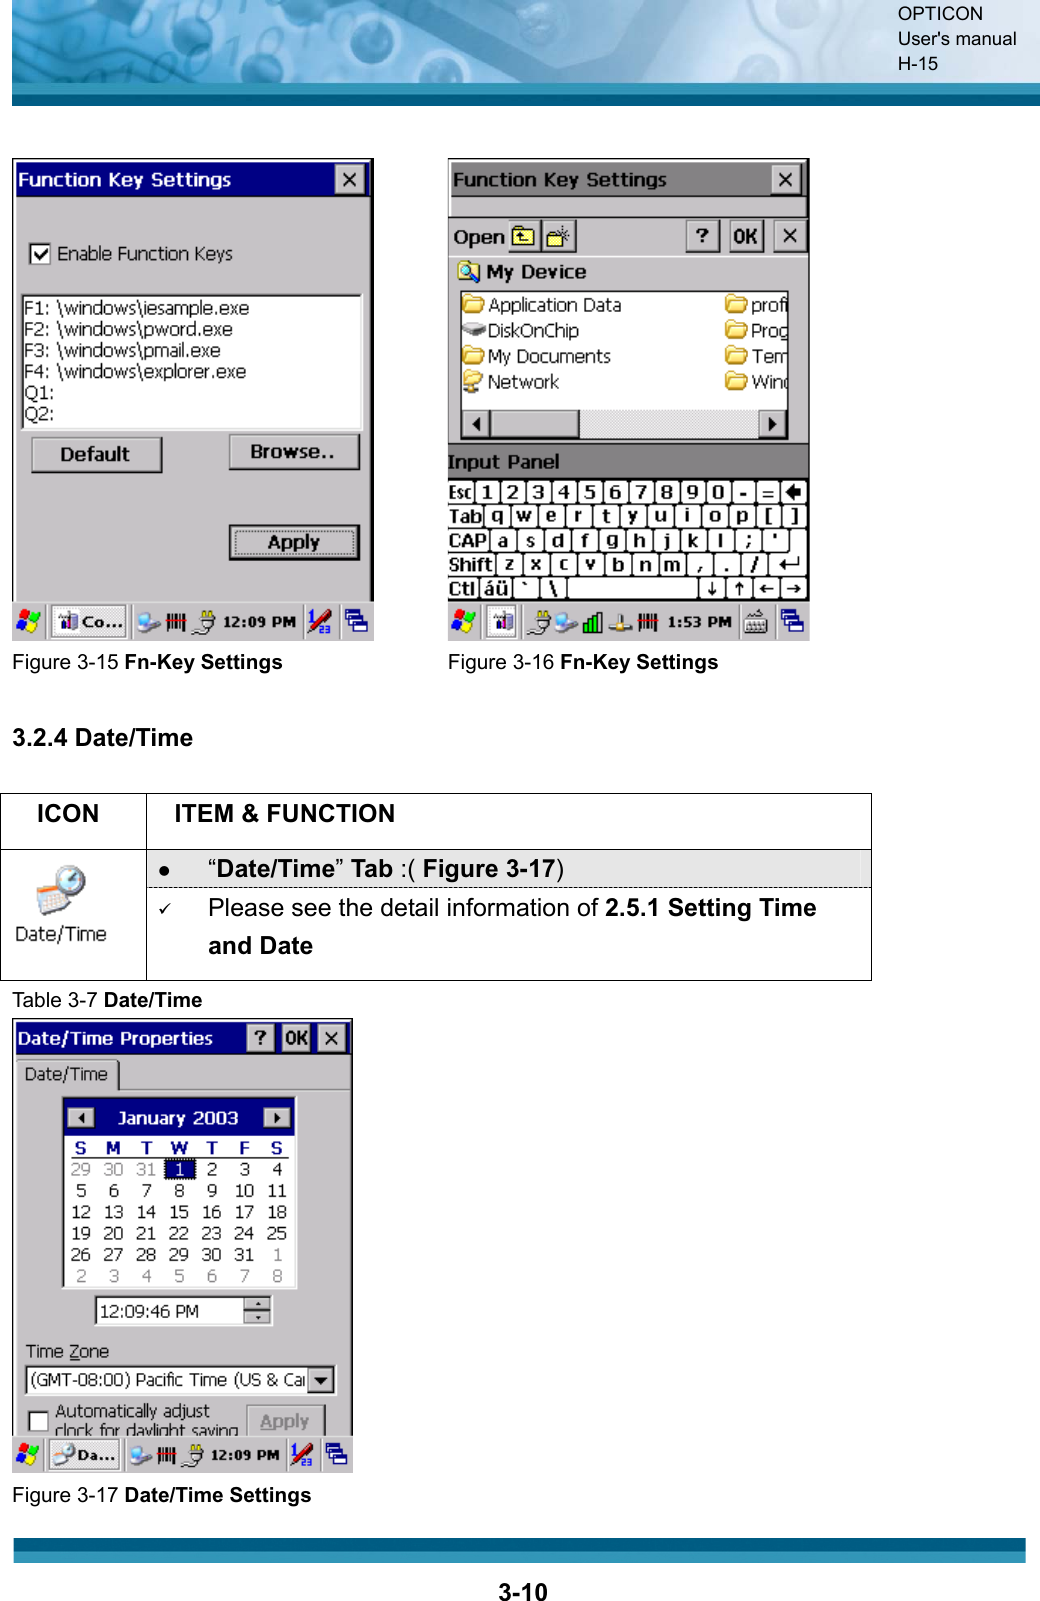 OPTICON User&apos;s manual H-153-10Figure 3-15 Fn-Key Settings Figure 3-16 Fn-Key Settings3.2.4 Date/Time ICON ITEM &amp; FUNCTION z“Date/Time”Tab :( Figure 3-17)9Please see the detail information of 2.5.1 Setting Time and DateTable 3-7 Date/TimeFigure 3-17 Date/Time Settings